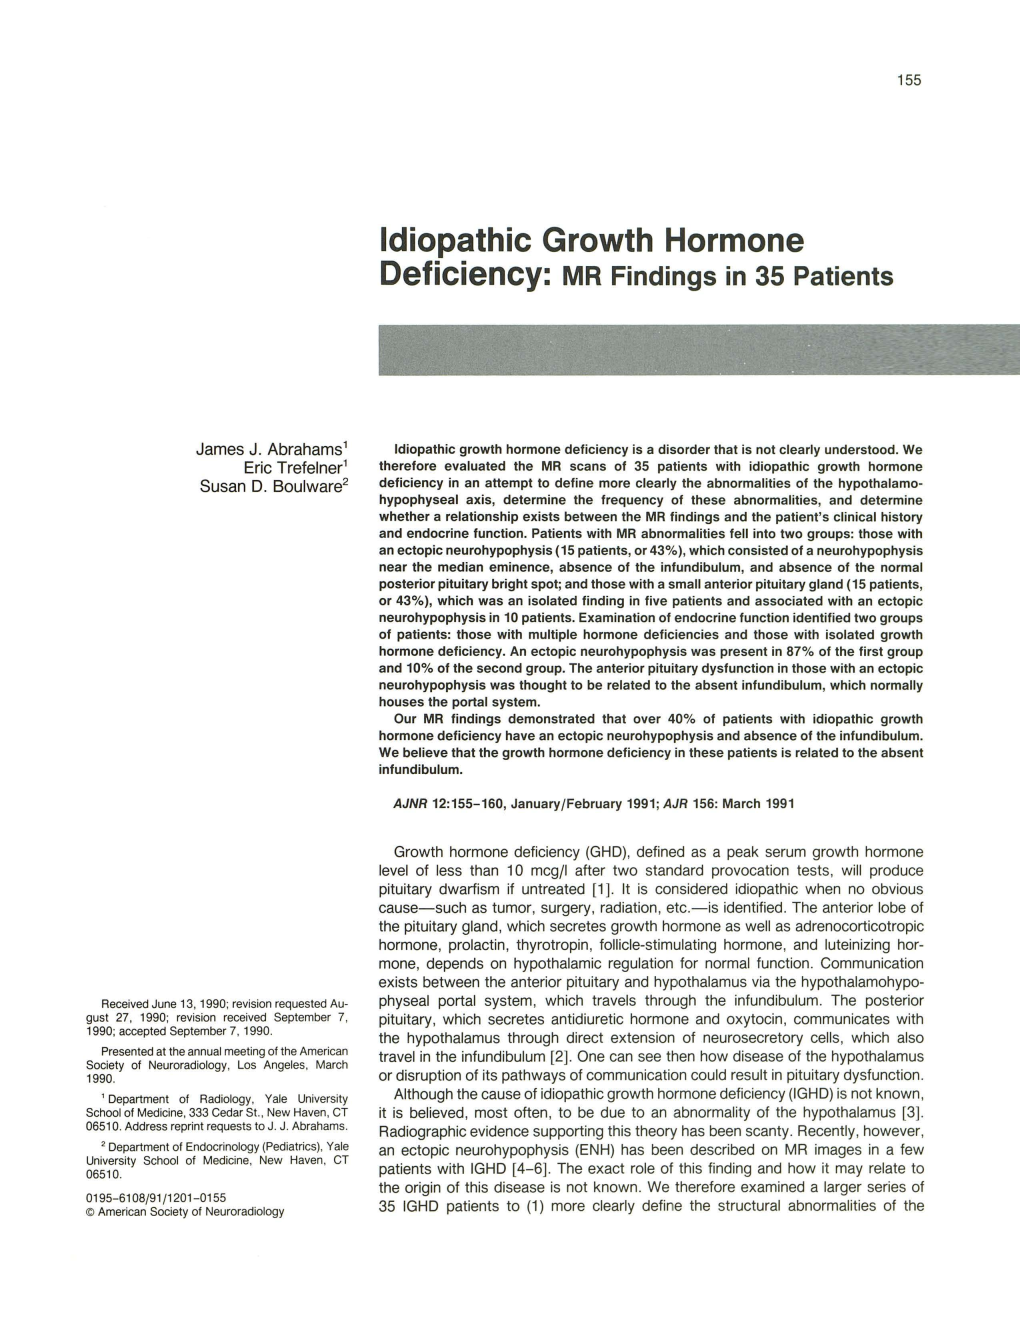 Idiopathic Growth Hormone Deficiency: MR Findings in 35 Patients